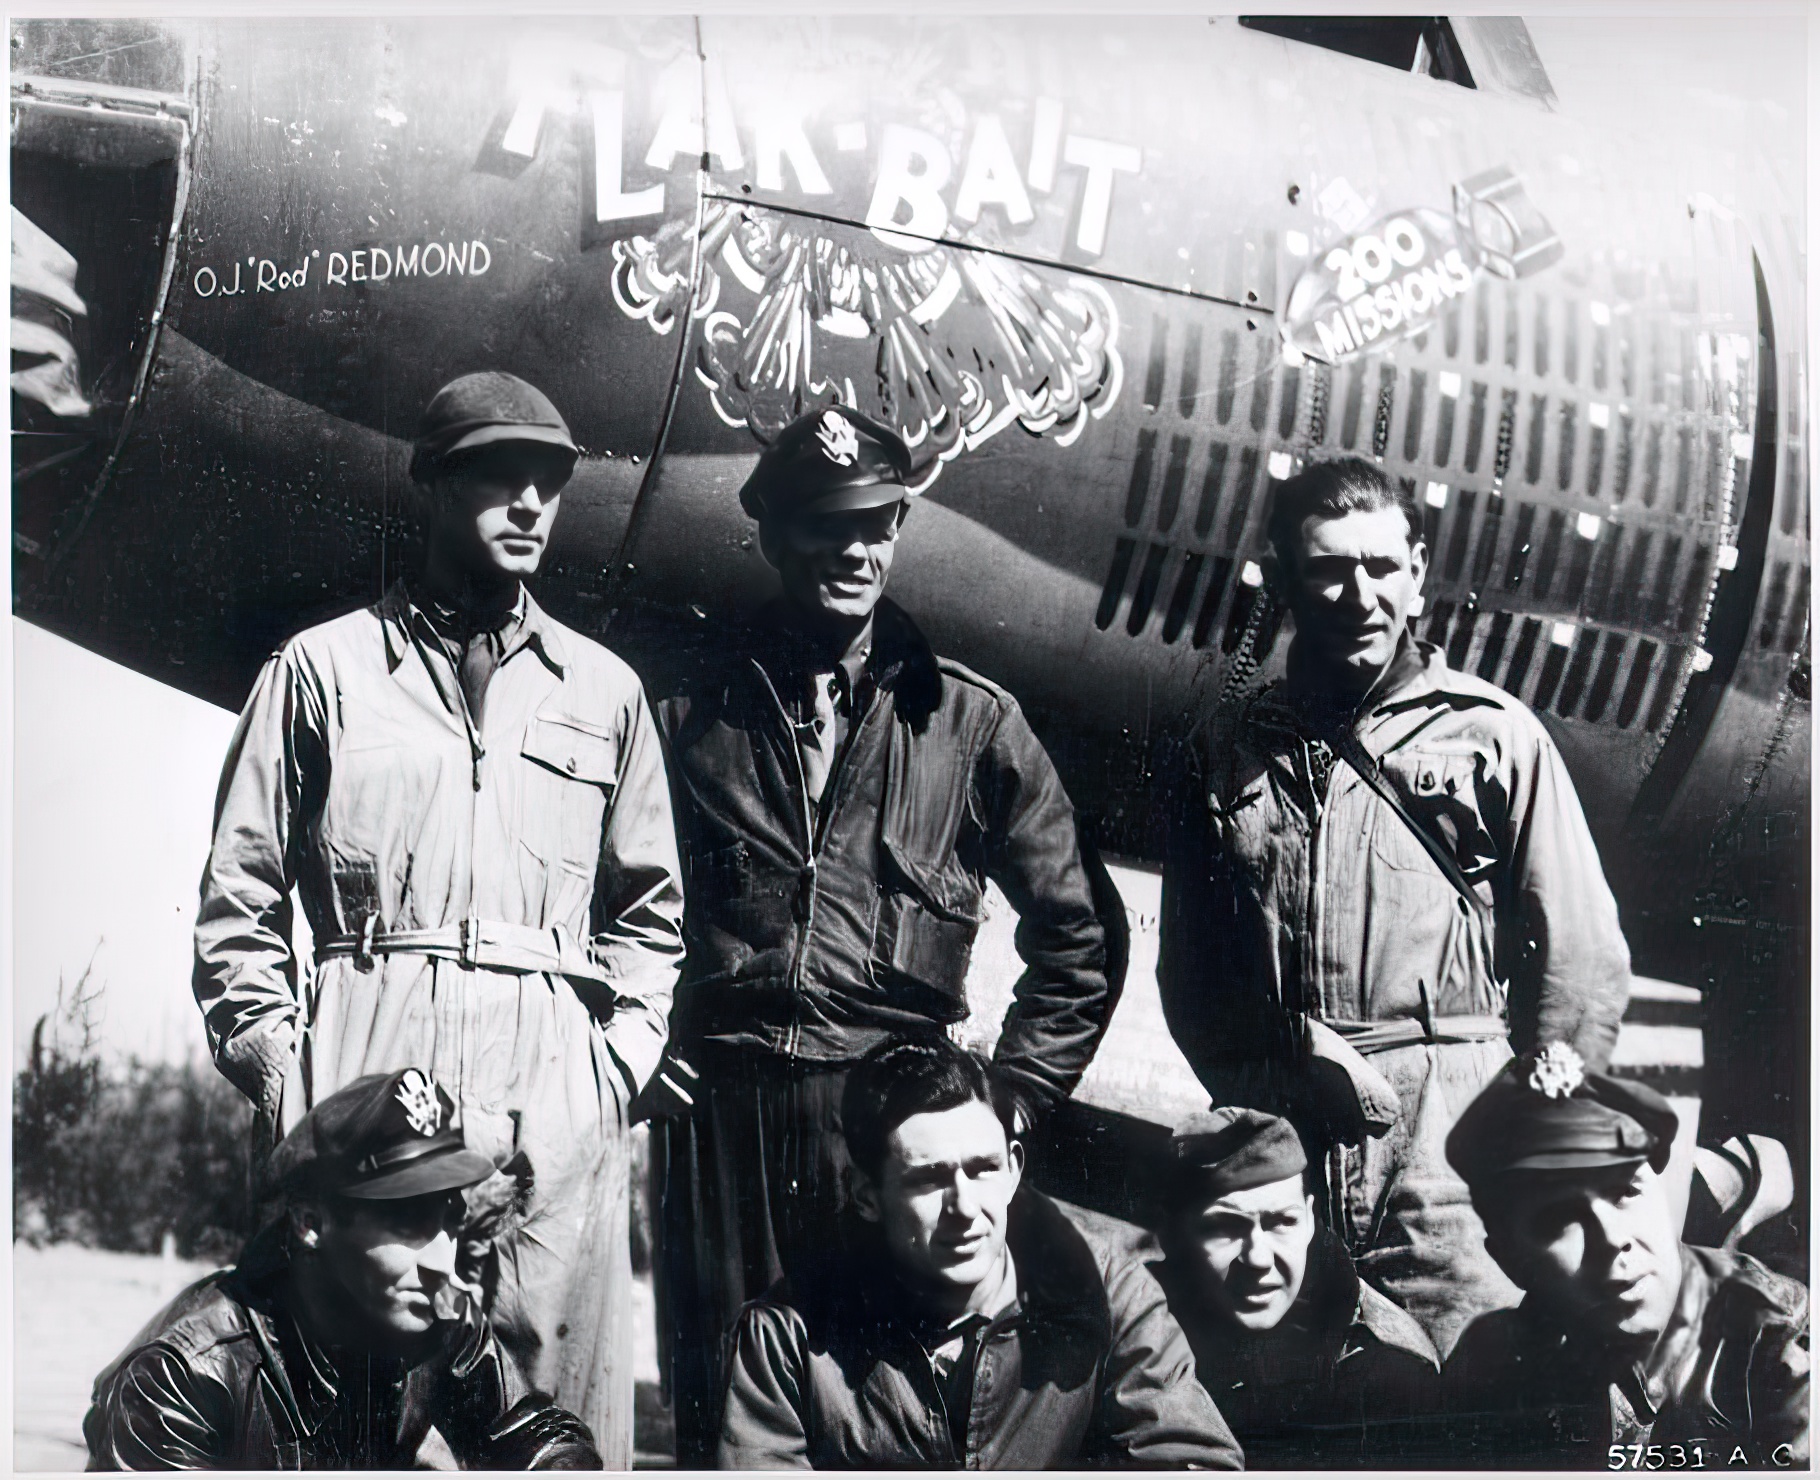 Flak-Bait’s crew poses with the bomber after the April 17, 1945 200th mission. The celebratory 200 Missions “bomb” just under the pilot’s cockpit is not the one found on the artifact today. This one was either superimposed on the aircraft or the photograph